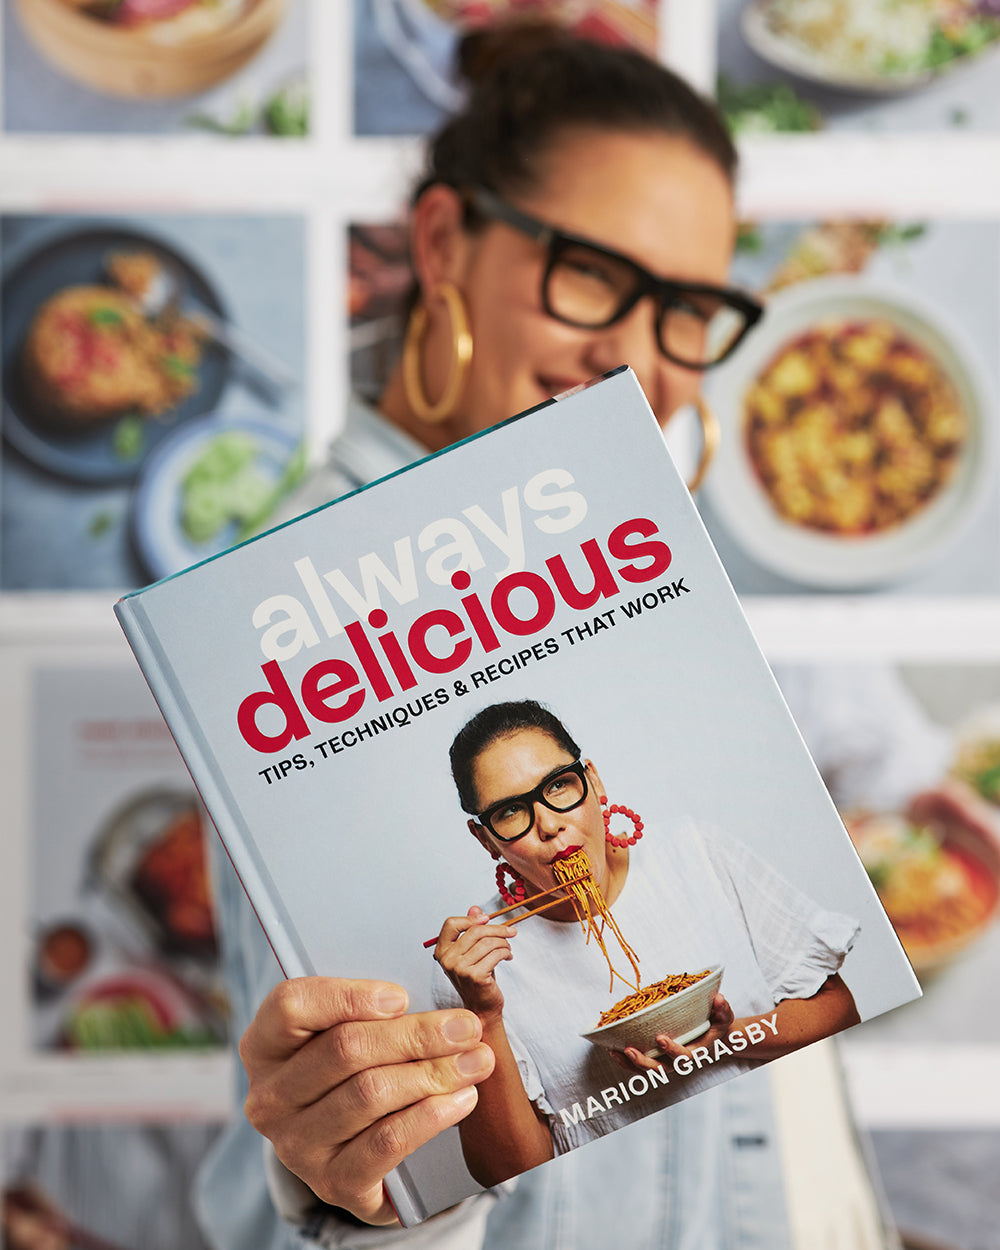 Always　Cookbook　Delicious　by　Marion　Grasby　–　CookDineHost